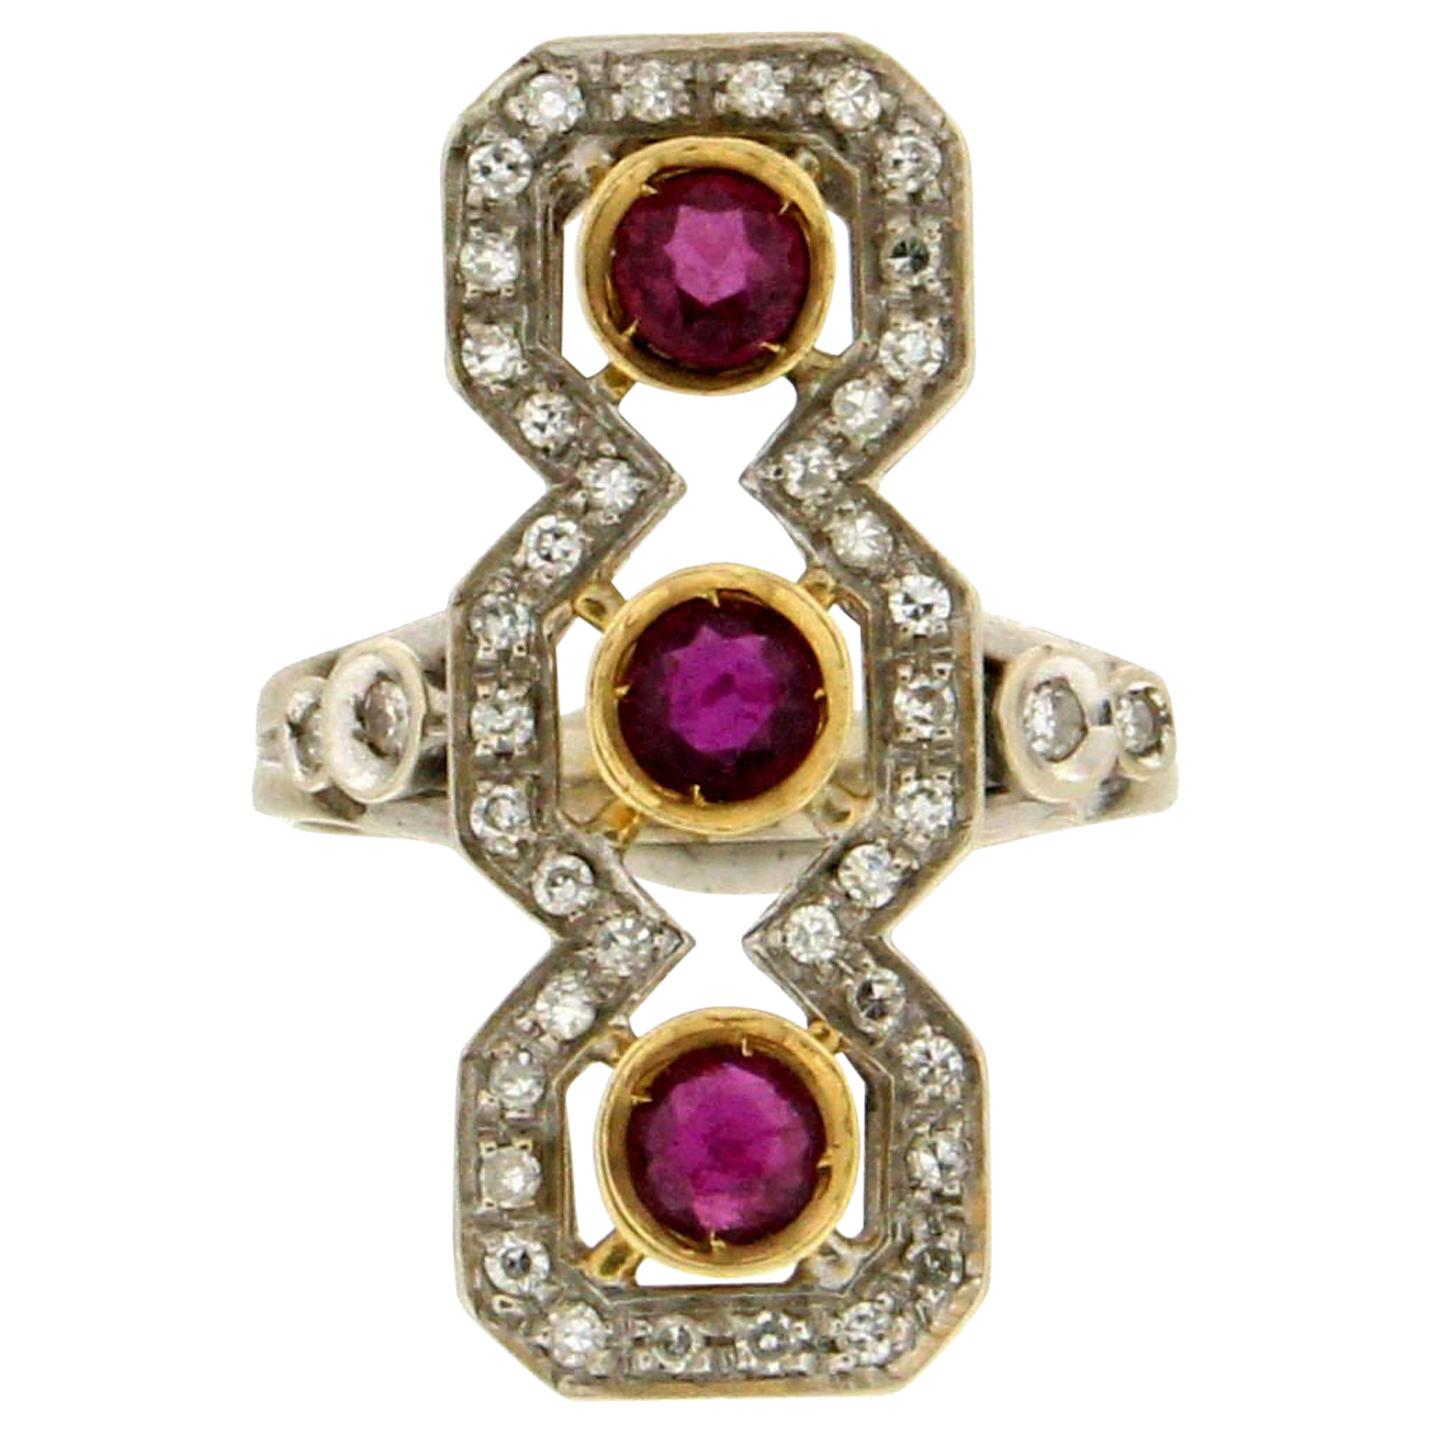 Handcraft Ruby 18 Karat Yellow and White Gold Diamonds Cocktail Ring For Sale